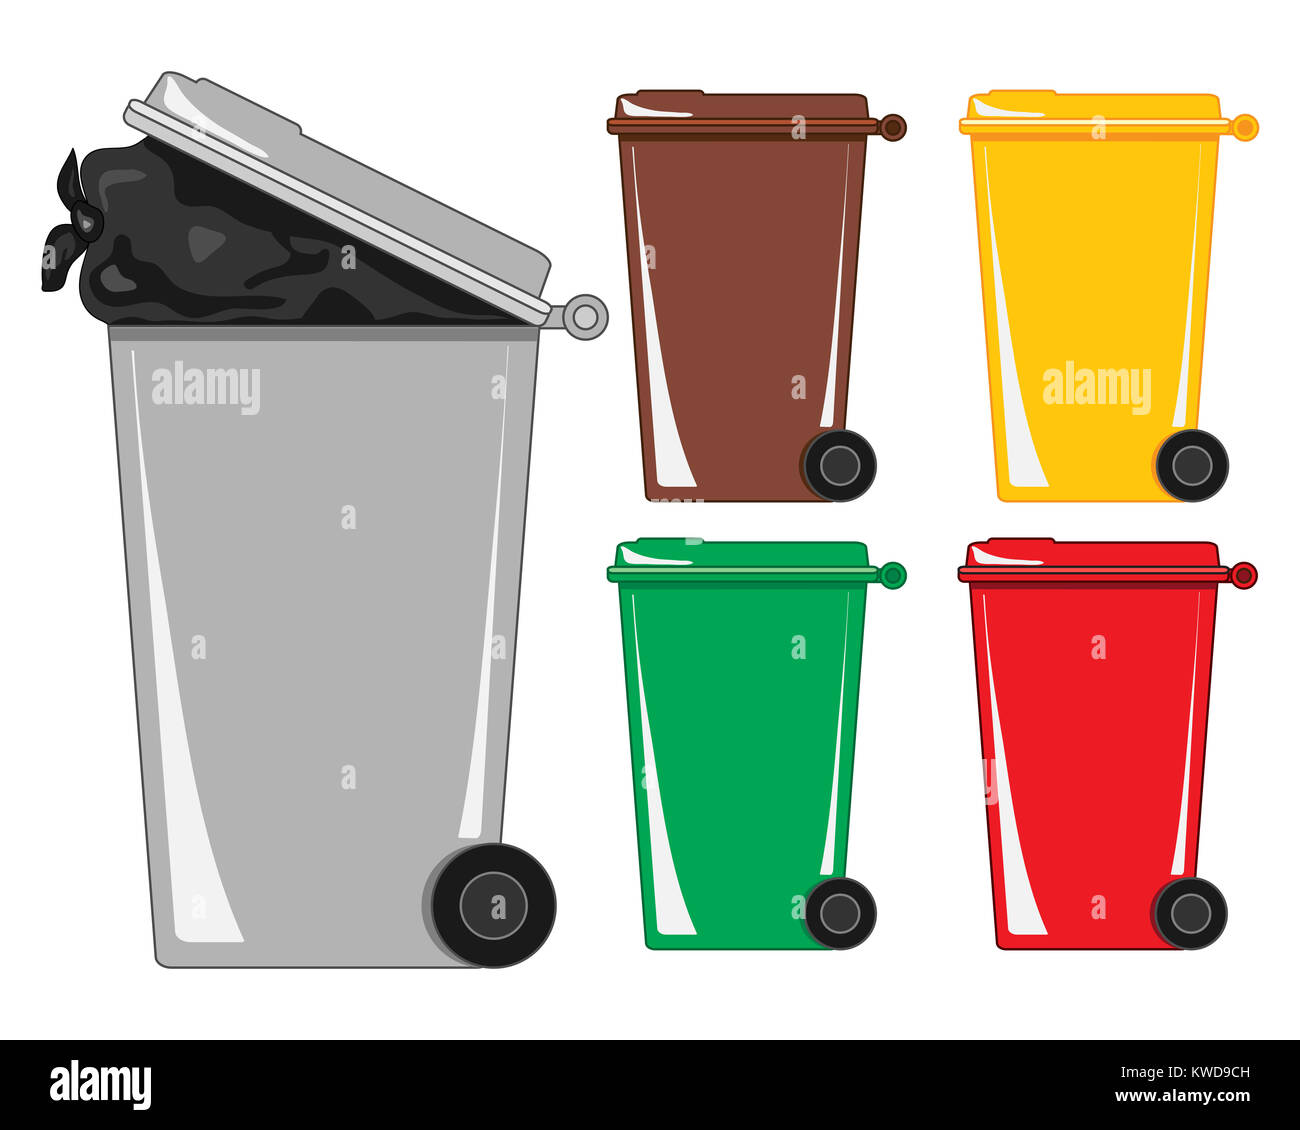 an illustration of a gray refuse bin with a bag of rubbish showing and various recycling bins on a white background Stock Photo